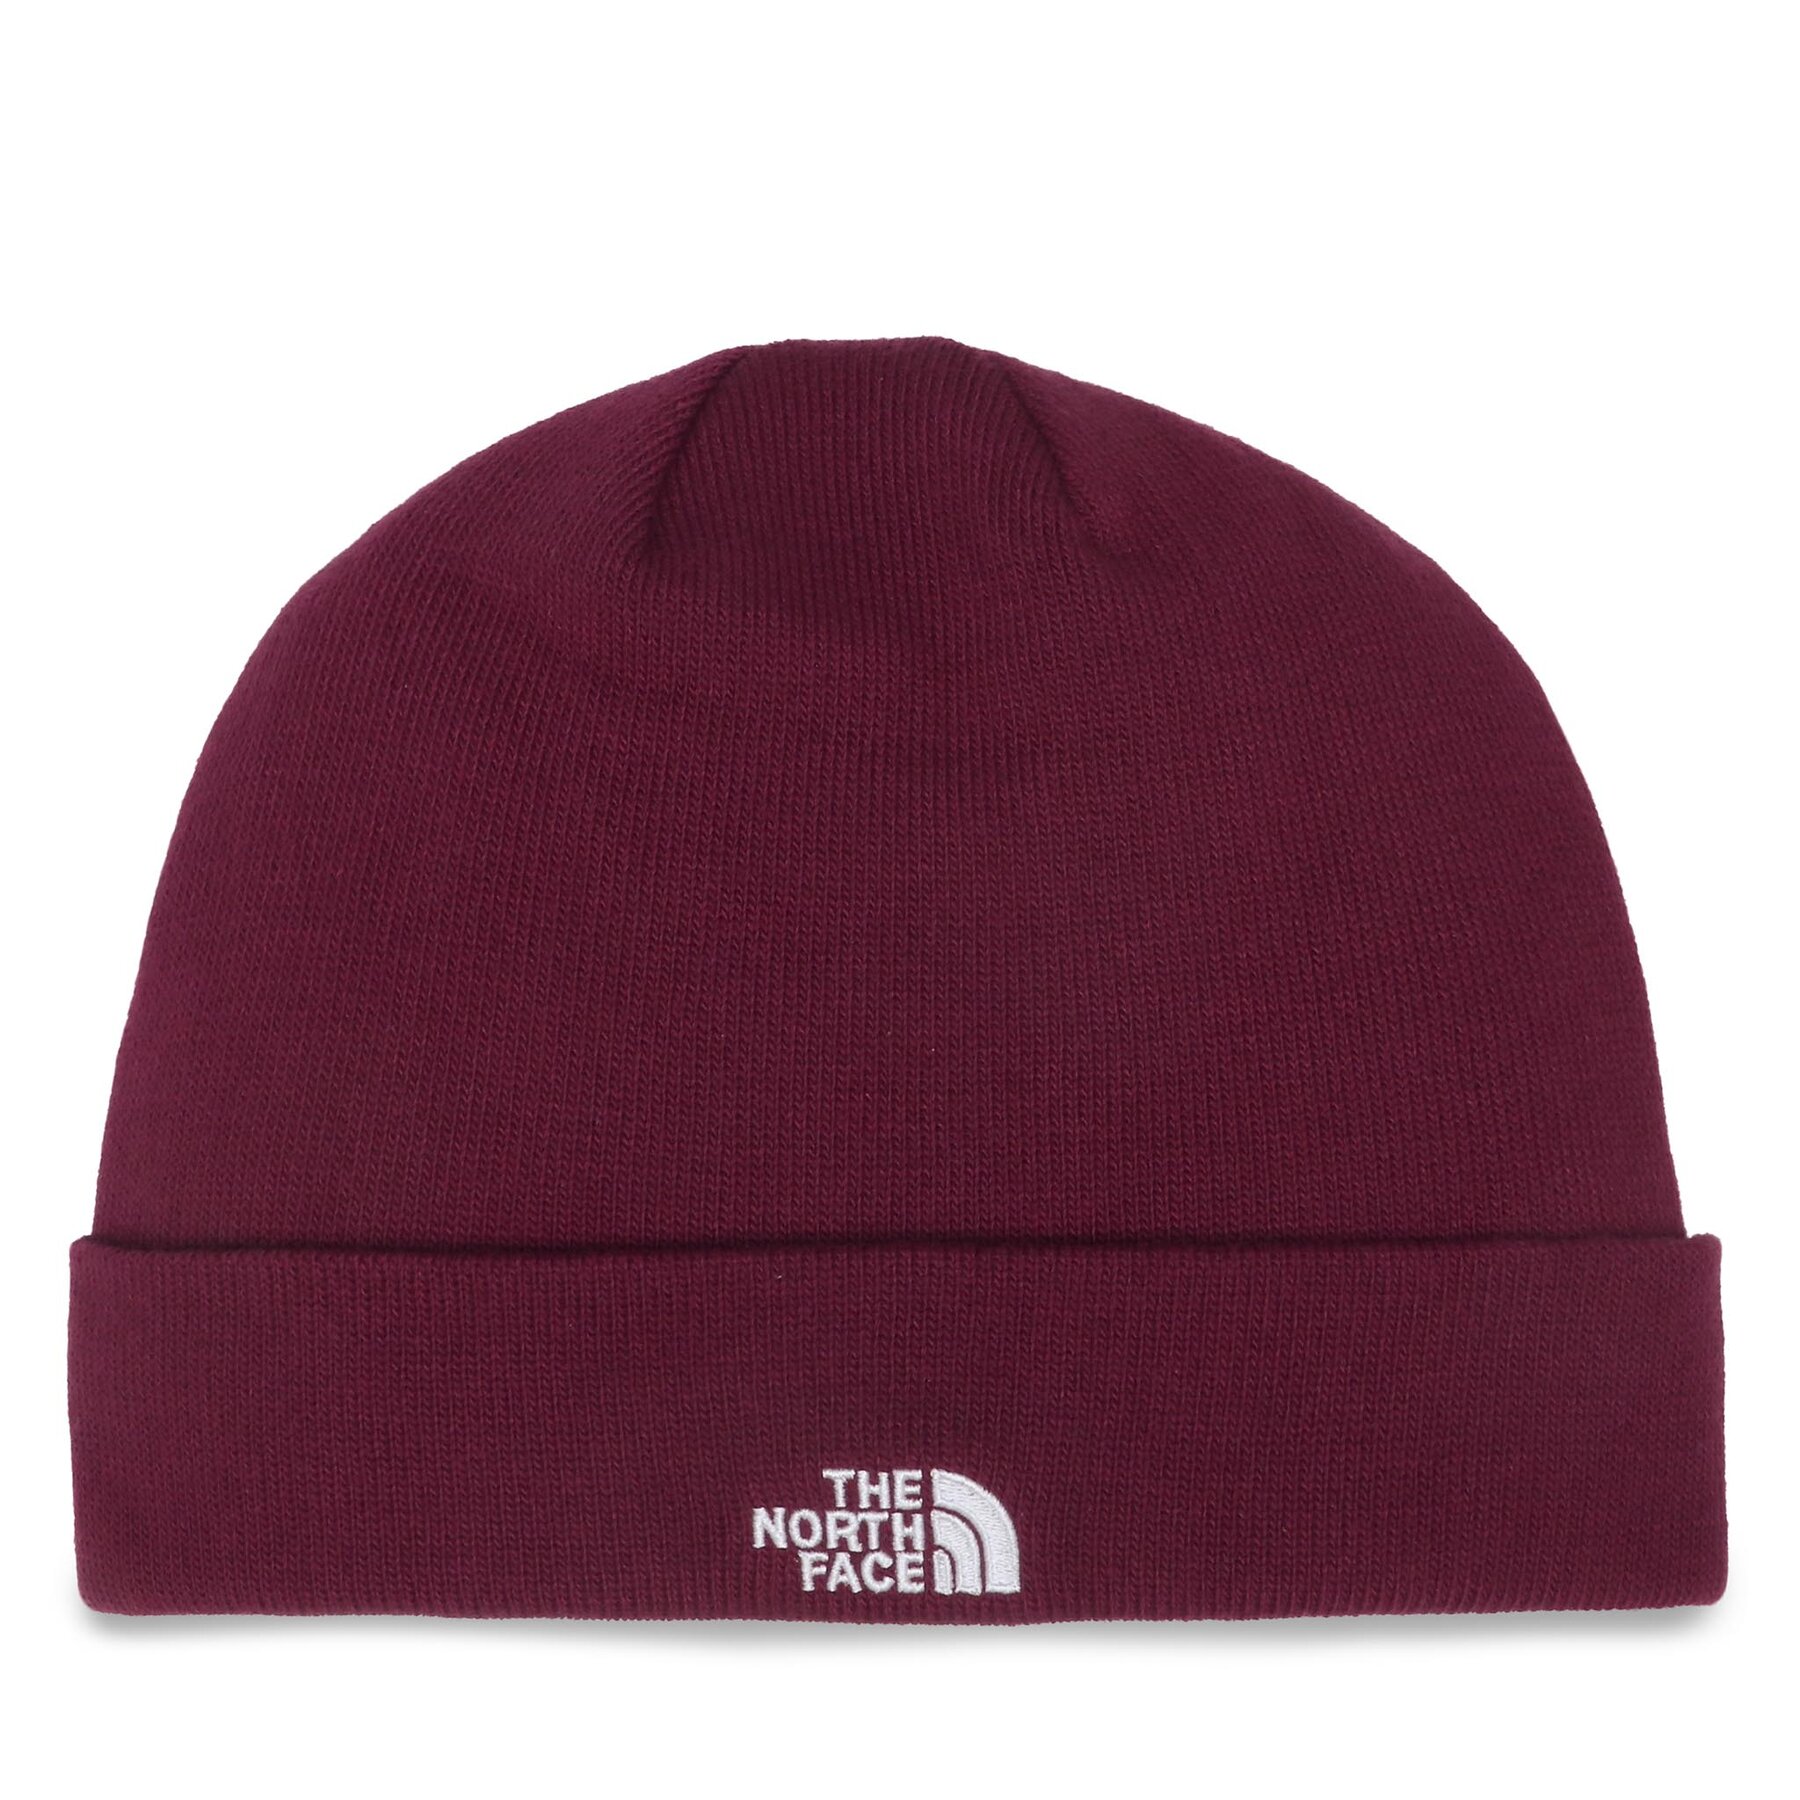 The North Face Norm Shallow Beanie (NF0A5FVZ) - Gorros